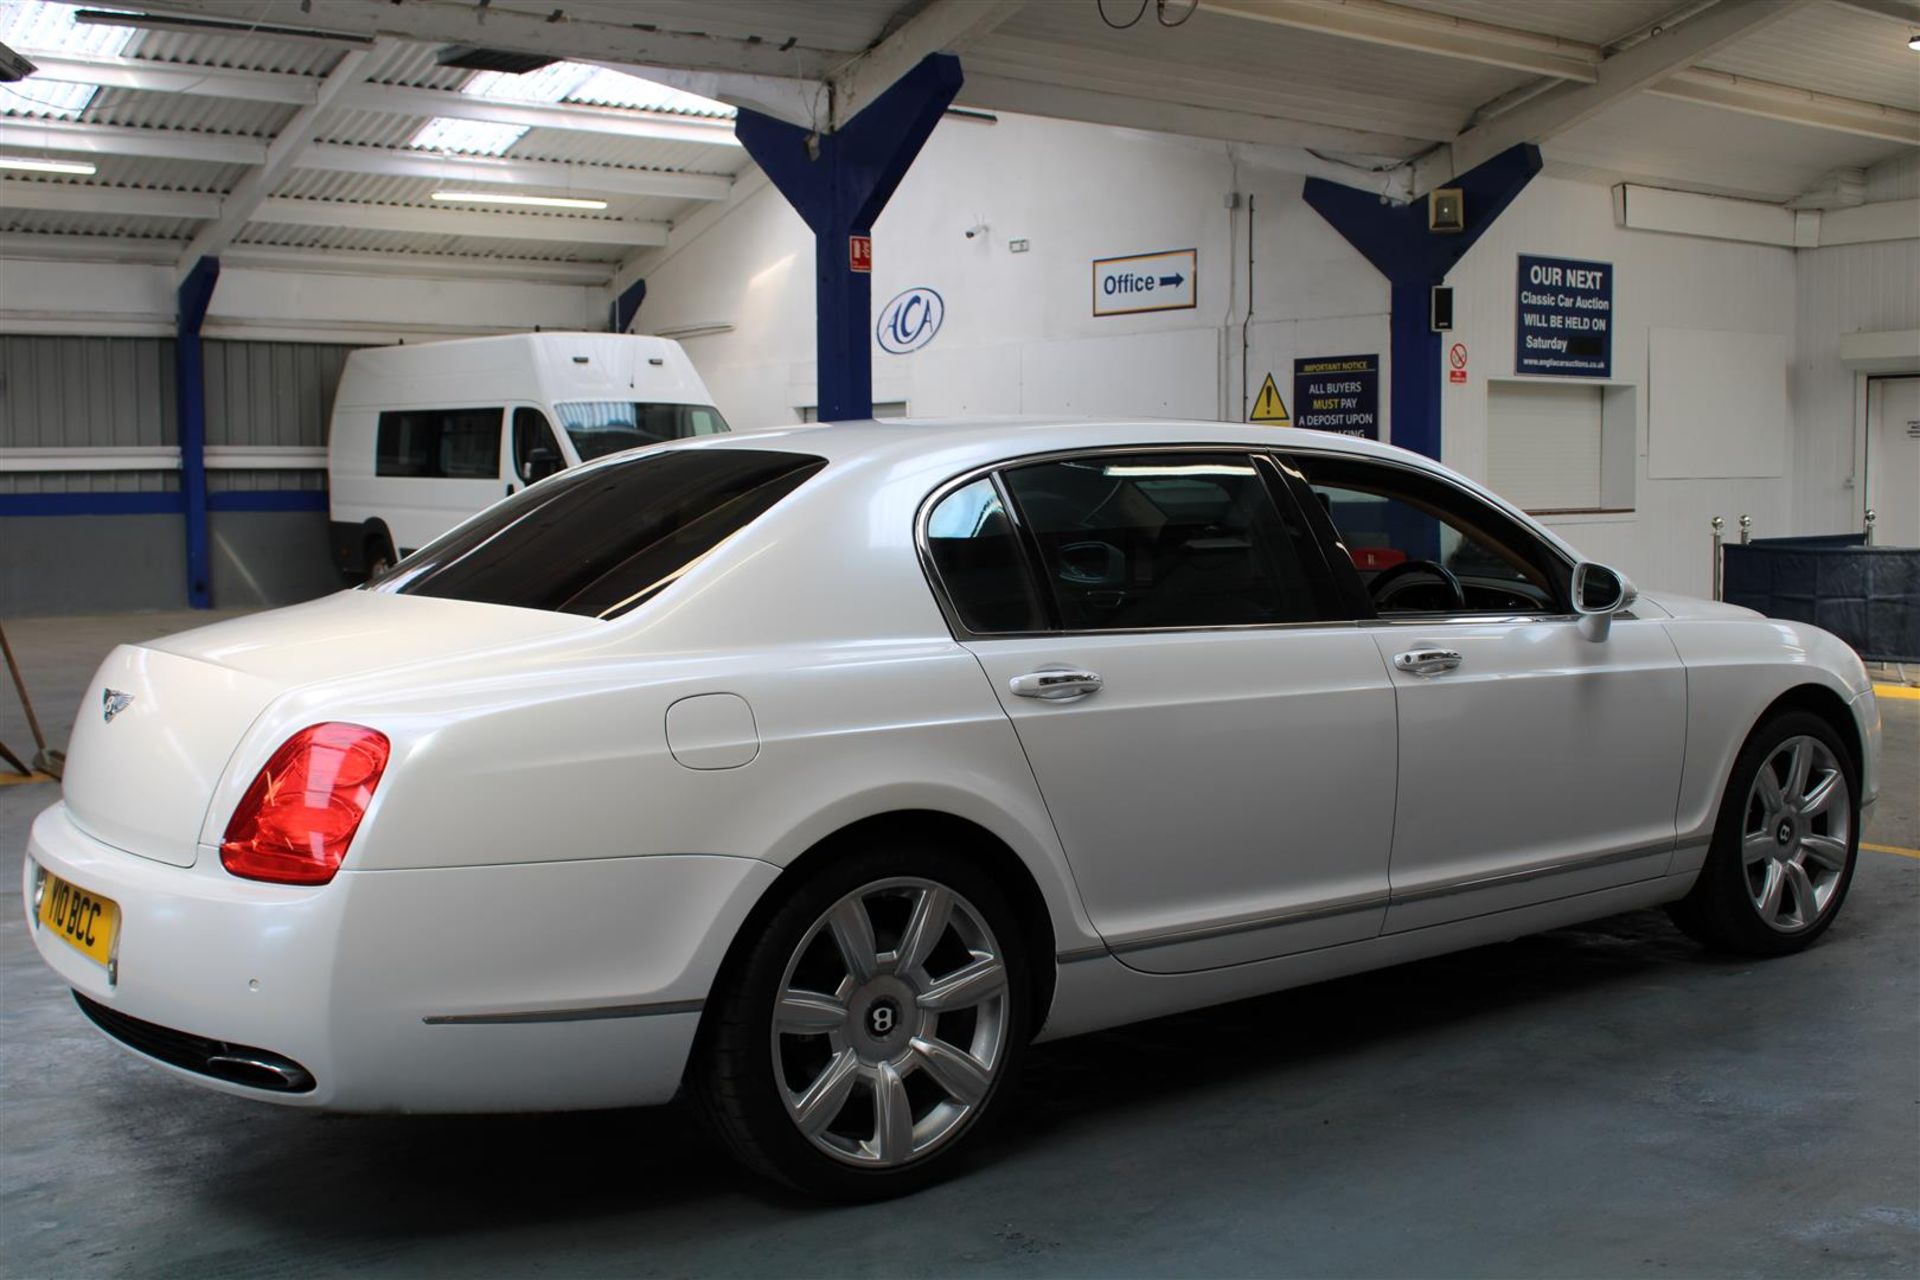 55 05 Bentley Cont. Flying Spur - Image 31 of 35